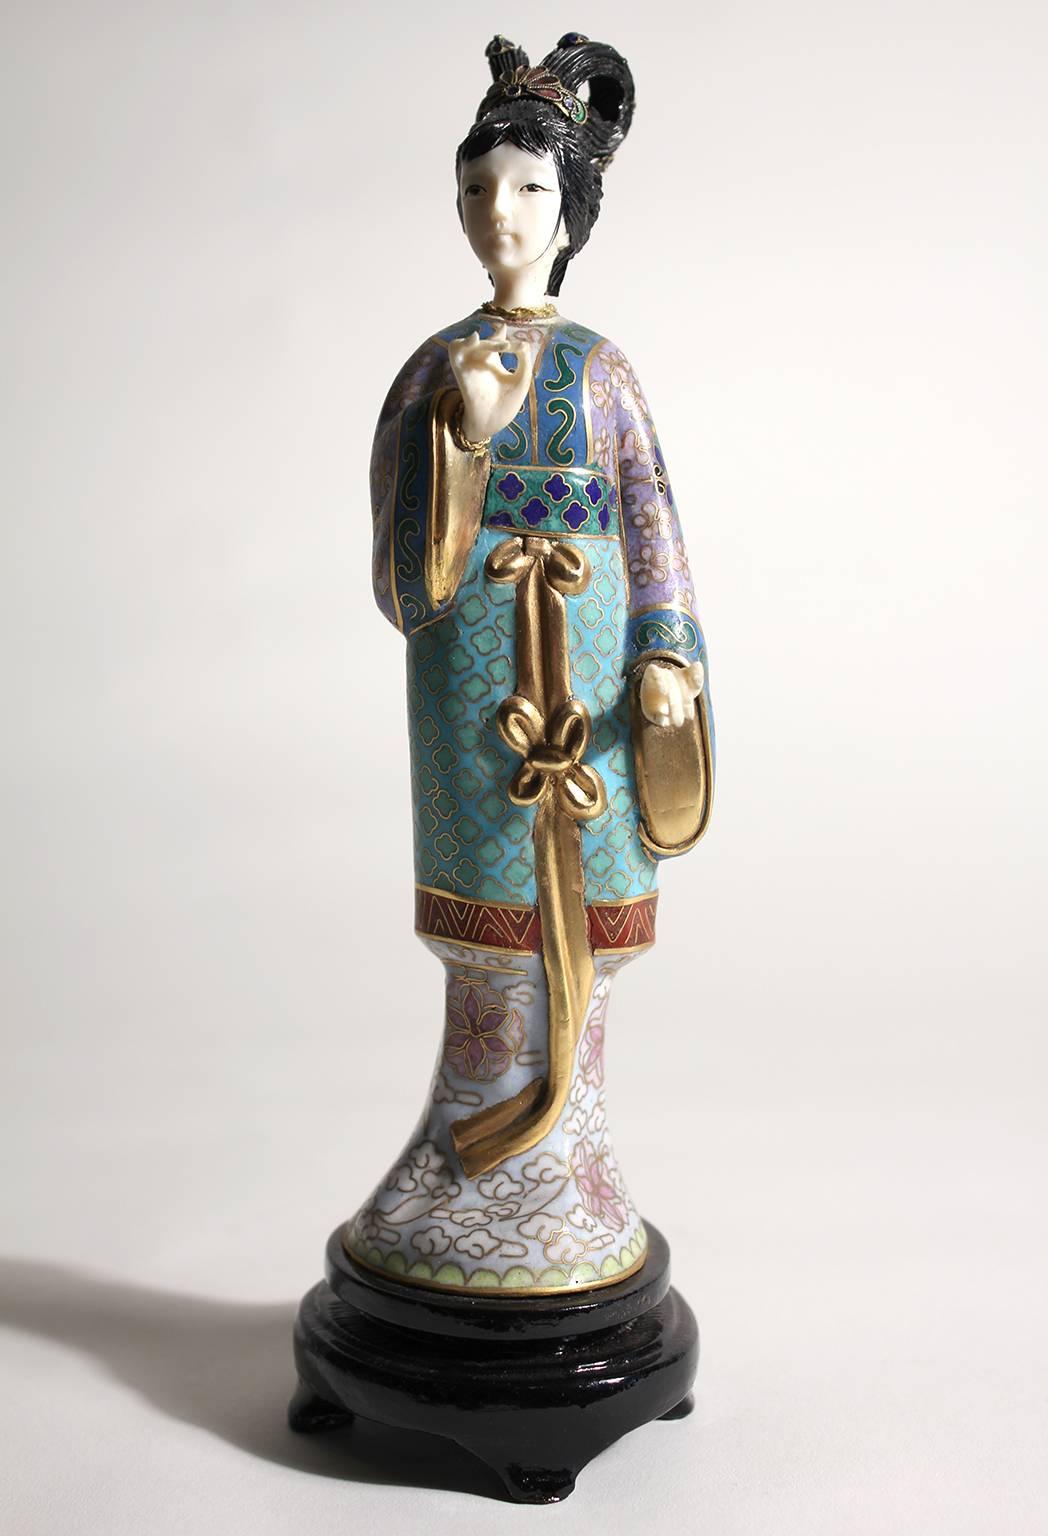 Stunning Chinese Guanyin cloisonné enameled figurine/sculpture. Comes with the original wood stand. Hands and head are carved. Stunning color and details are second to none. Measures 8 1/2